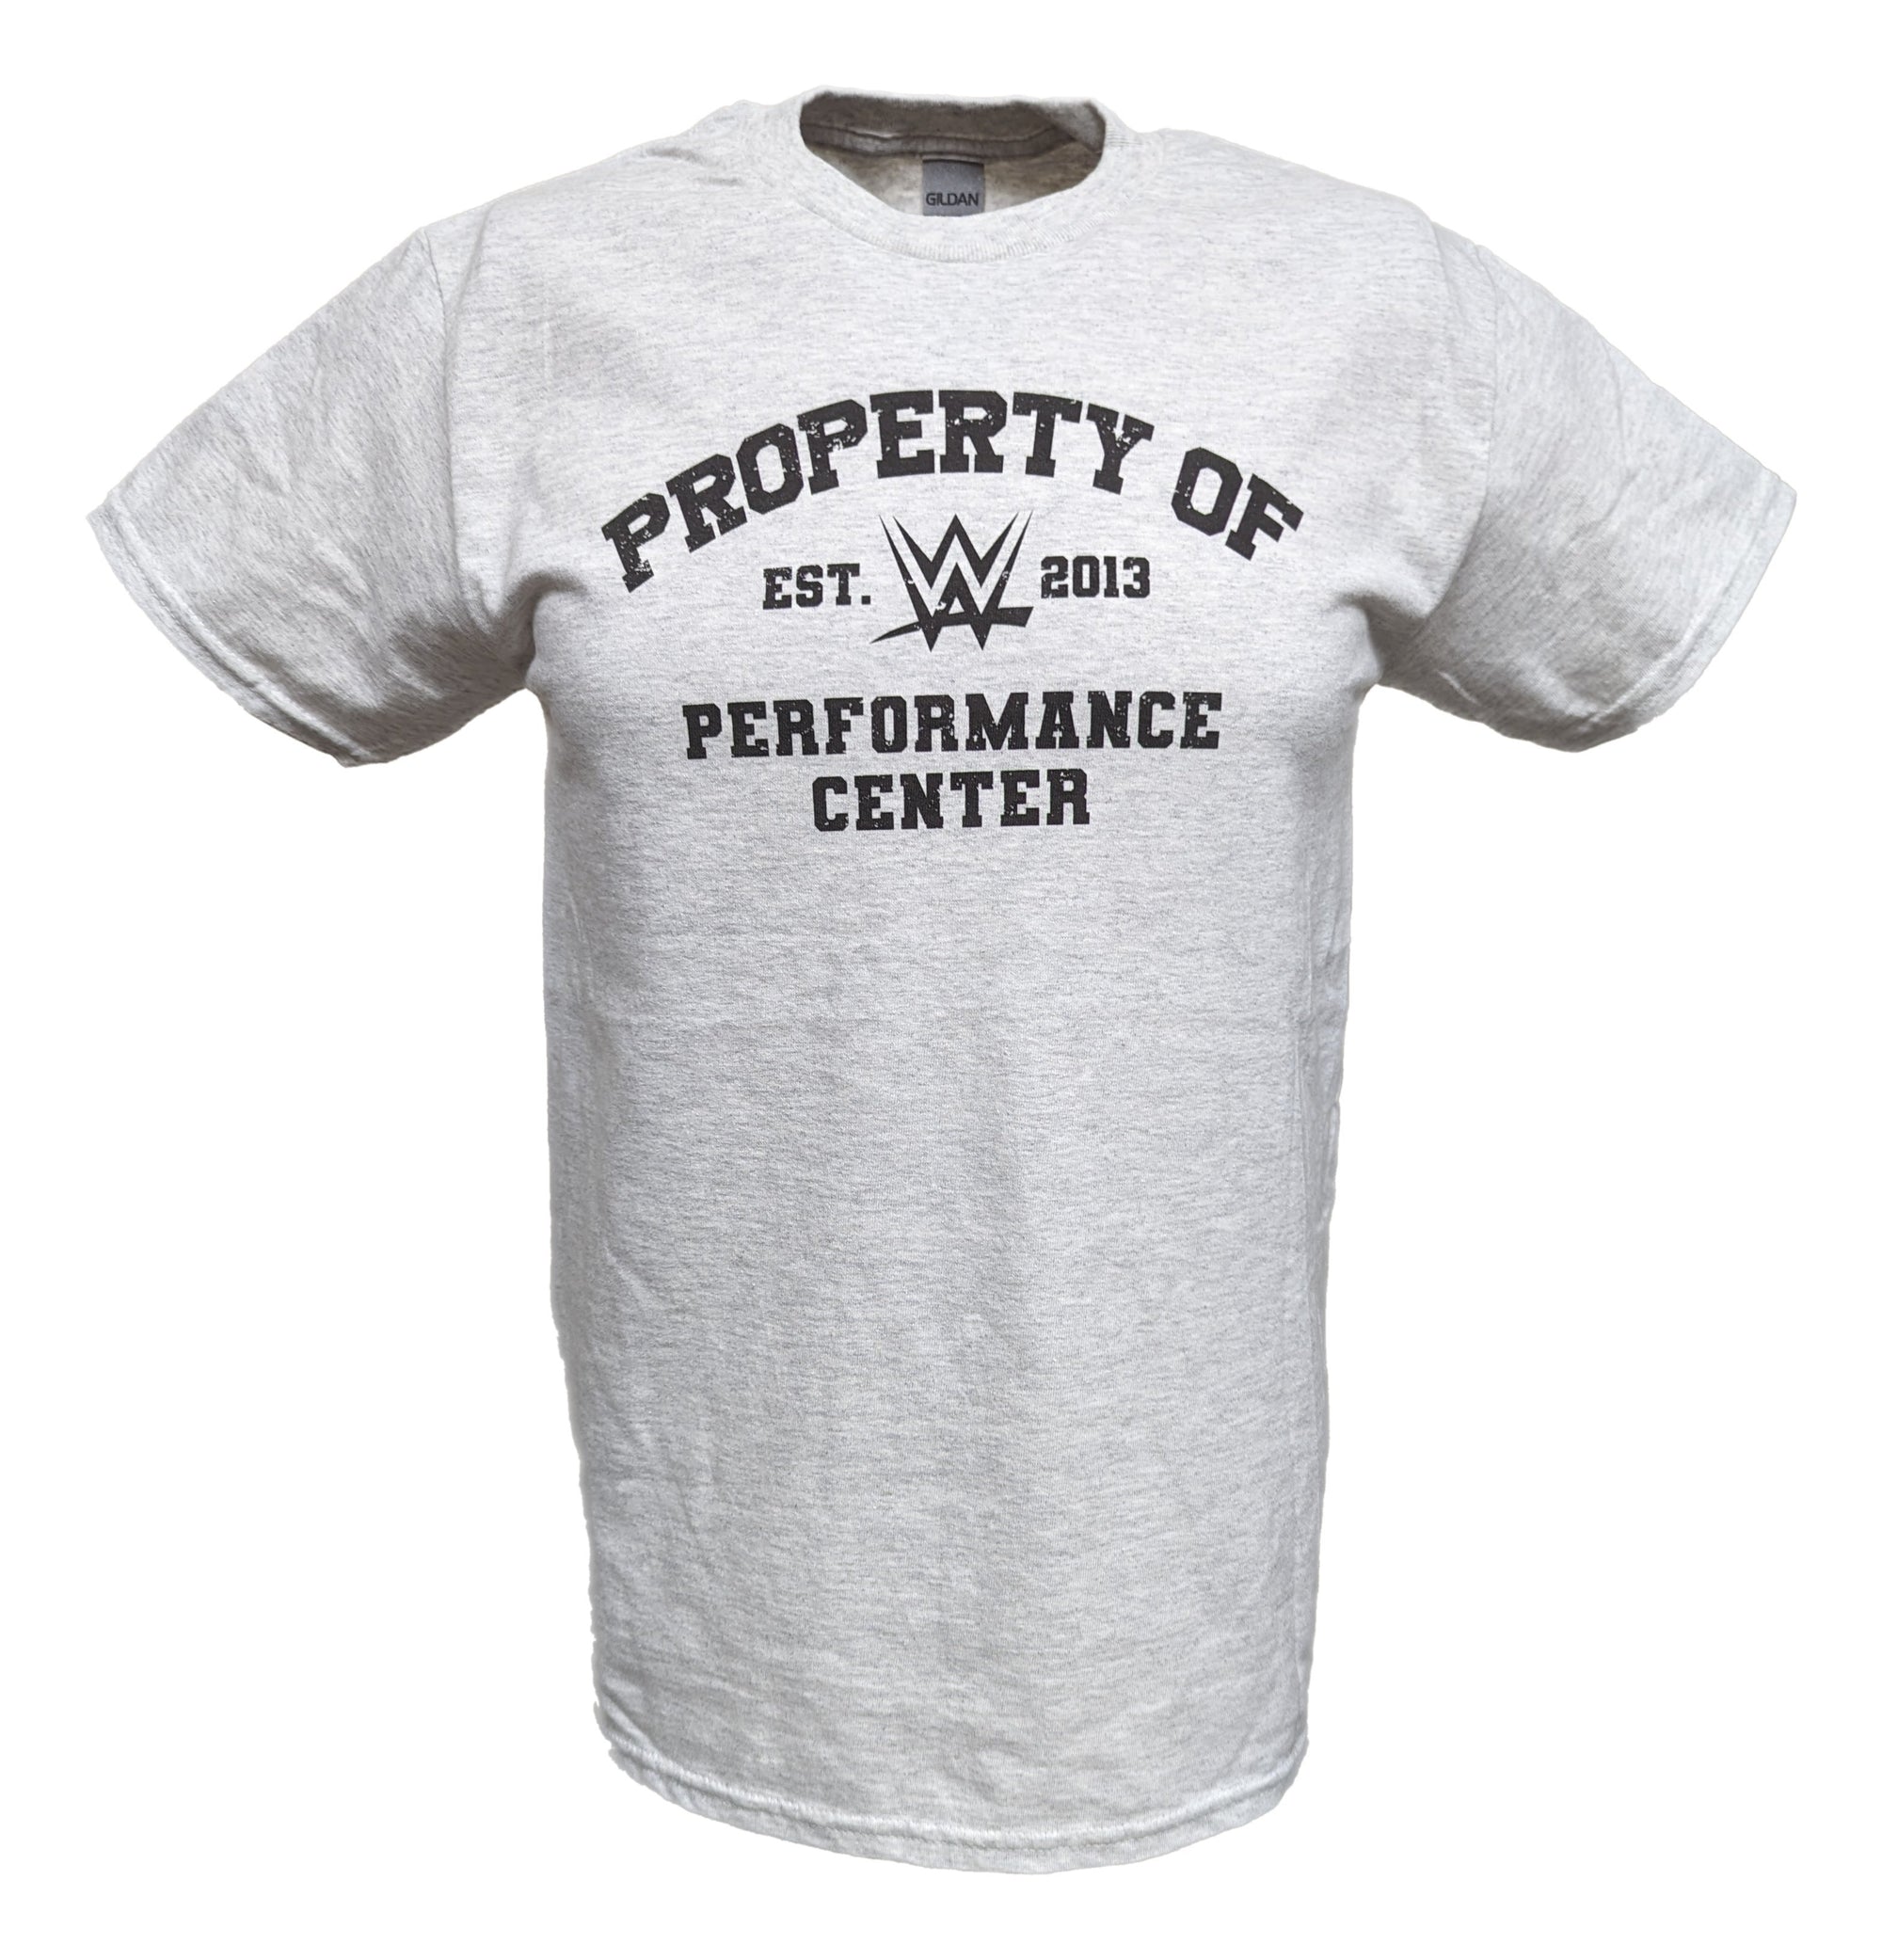 WWE Property of Performance Center Mens Gray T-shirt 2013 Extreme Wrestling